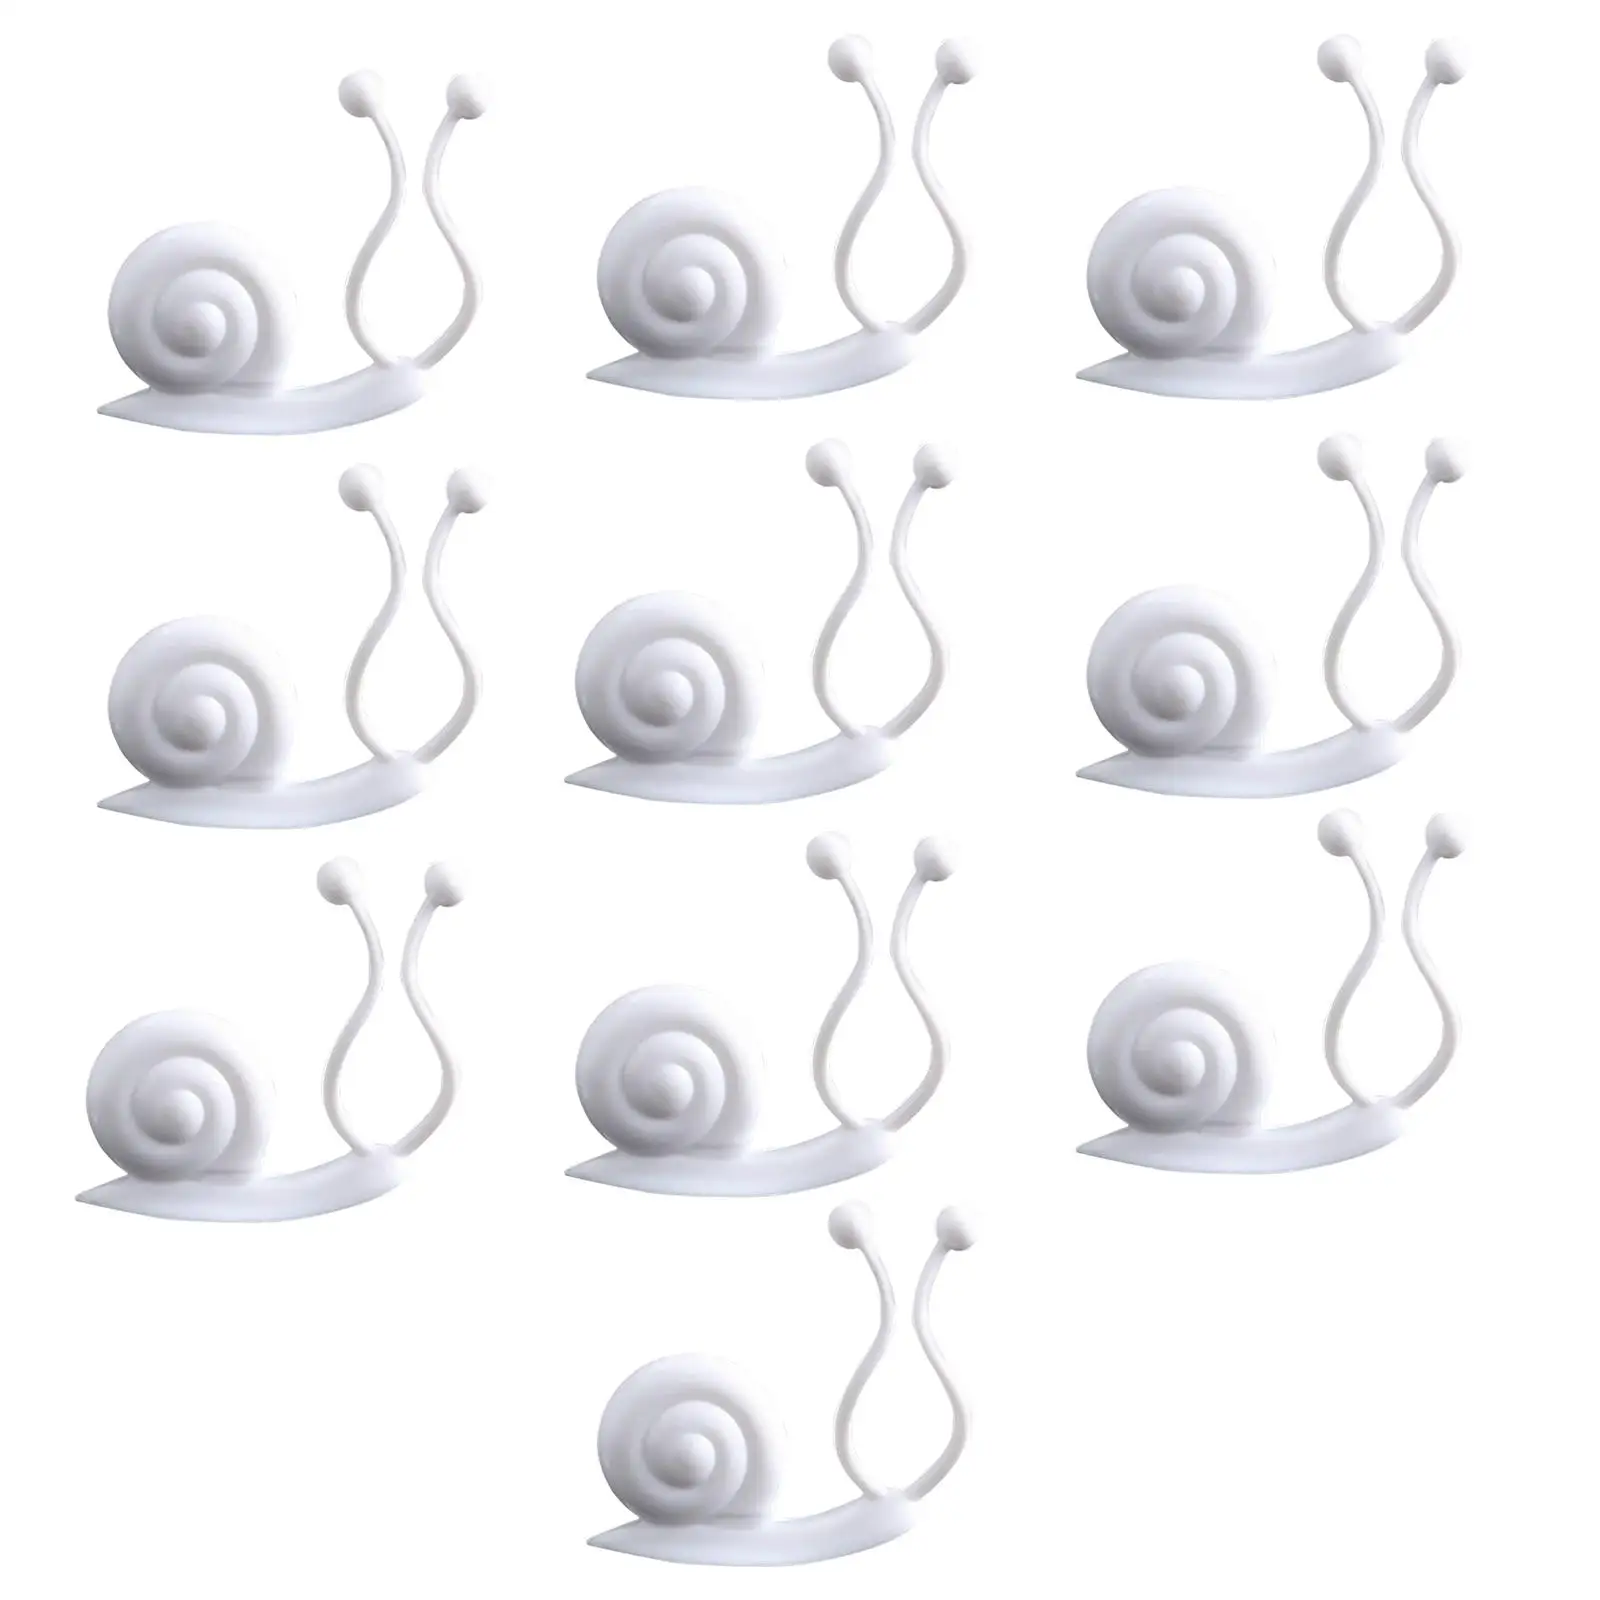 10Pcs Plant Climbing Wall Fixture Clips Decor for Gardening Plants Home